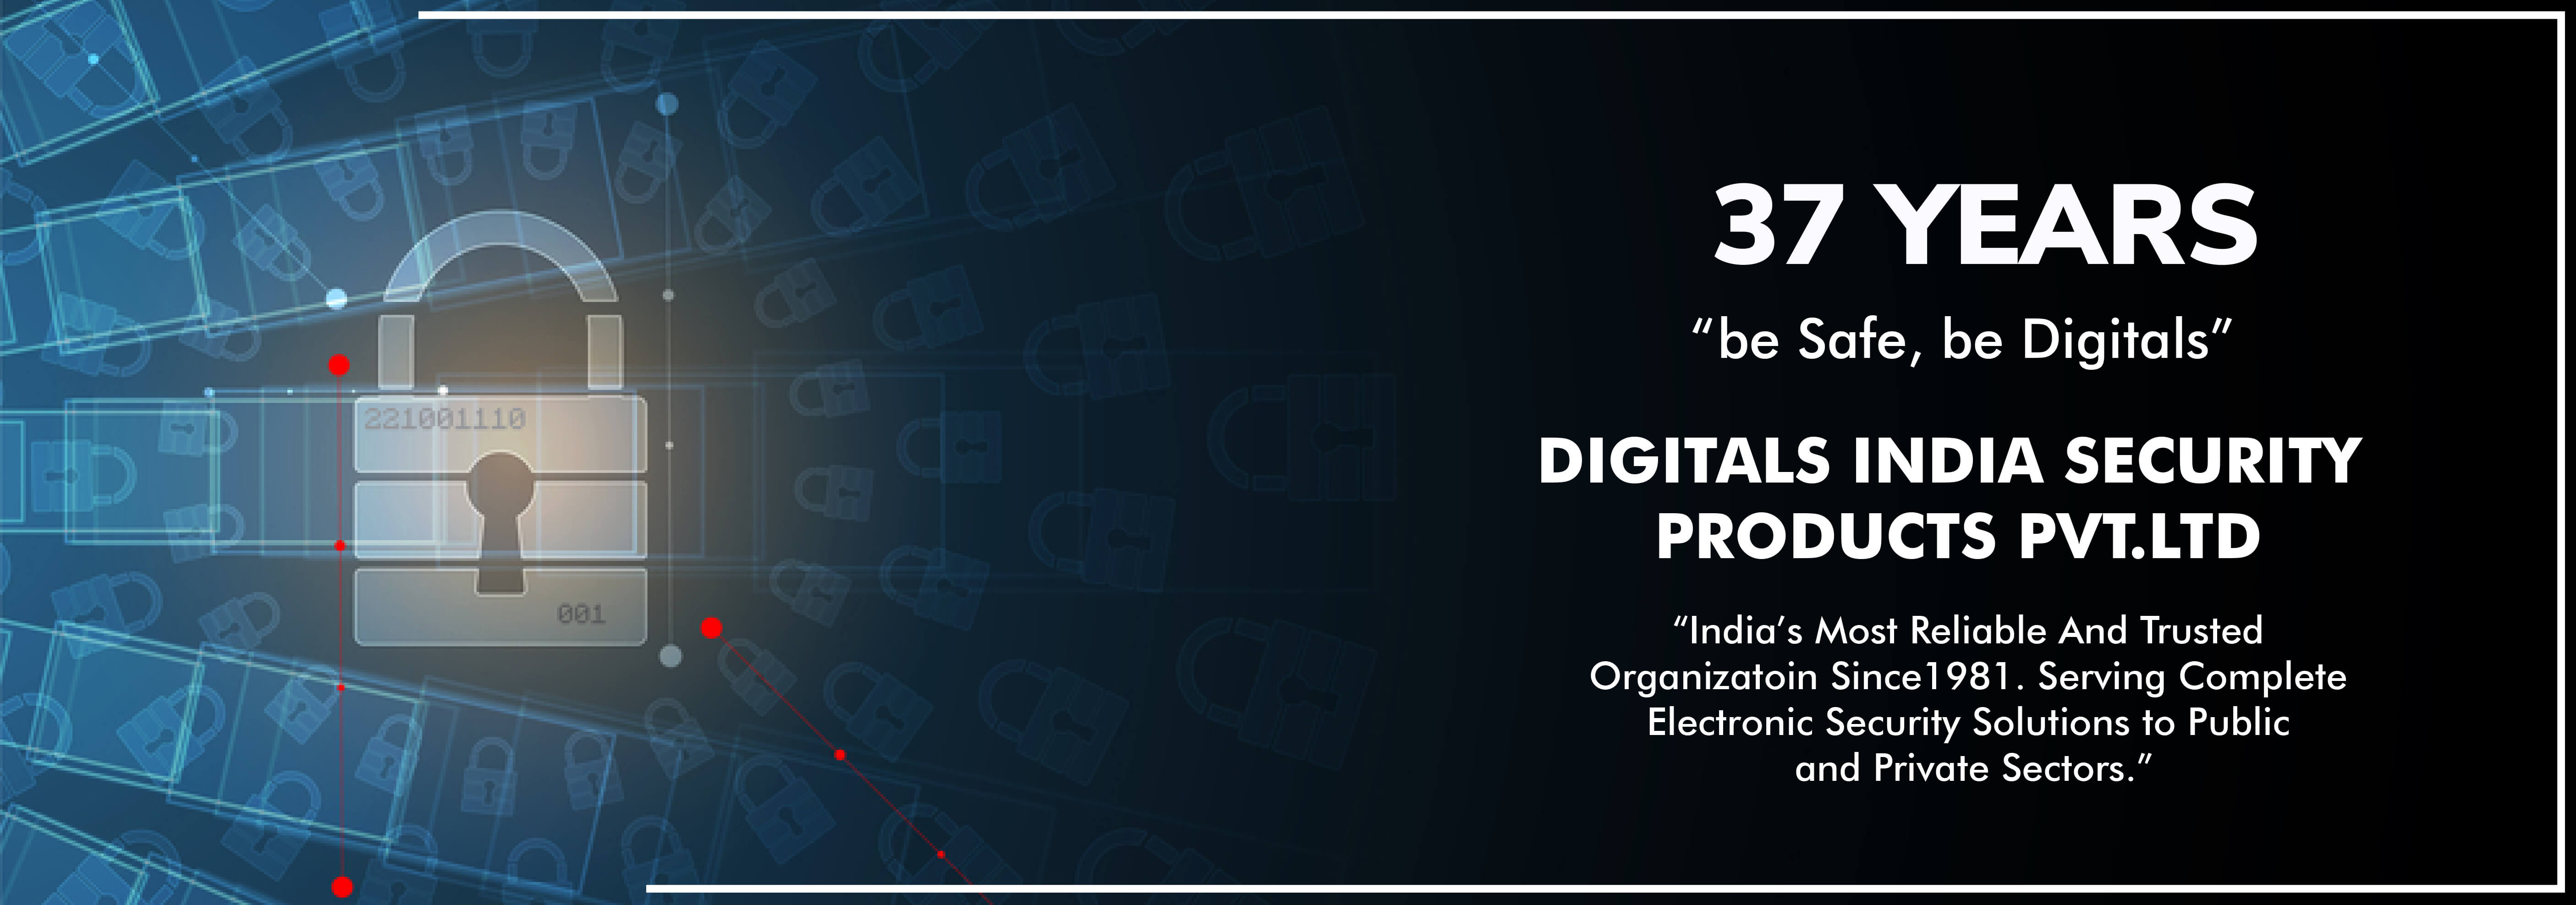 Digital India Security Products Pvt. Ltd